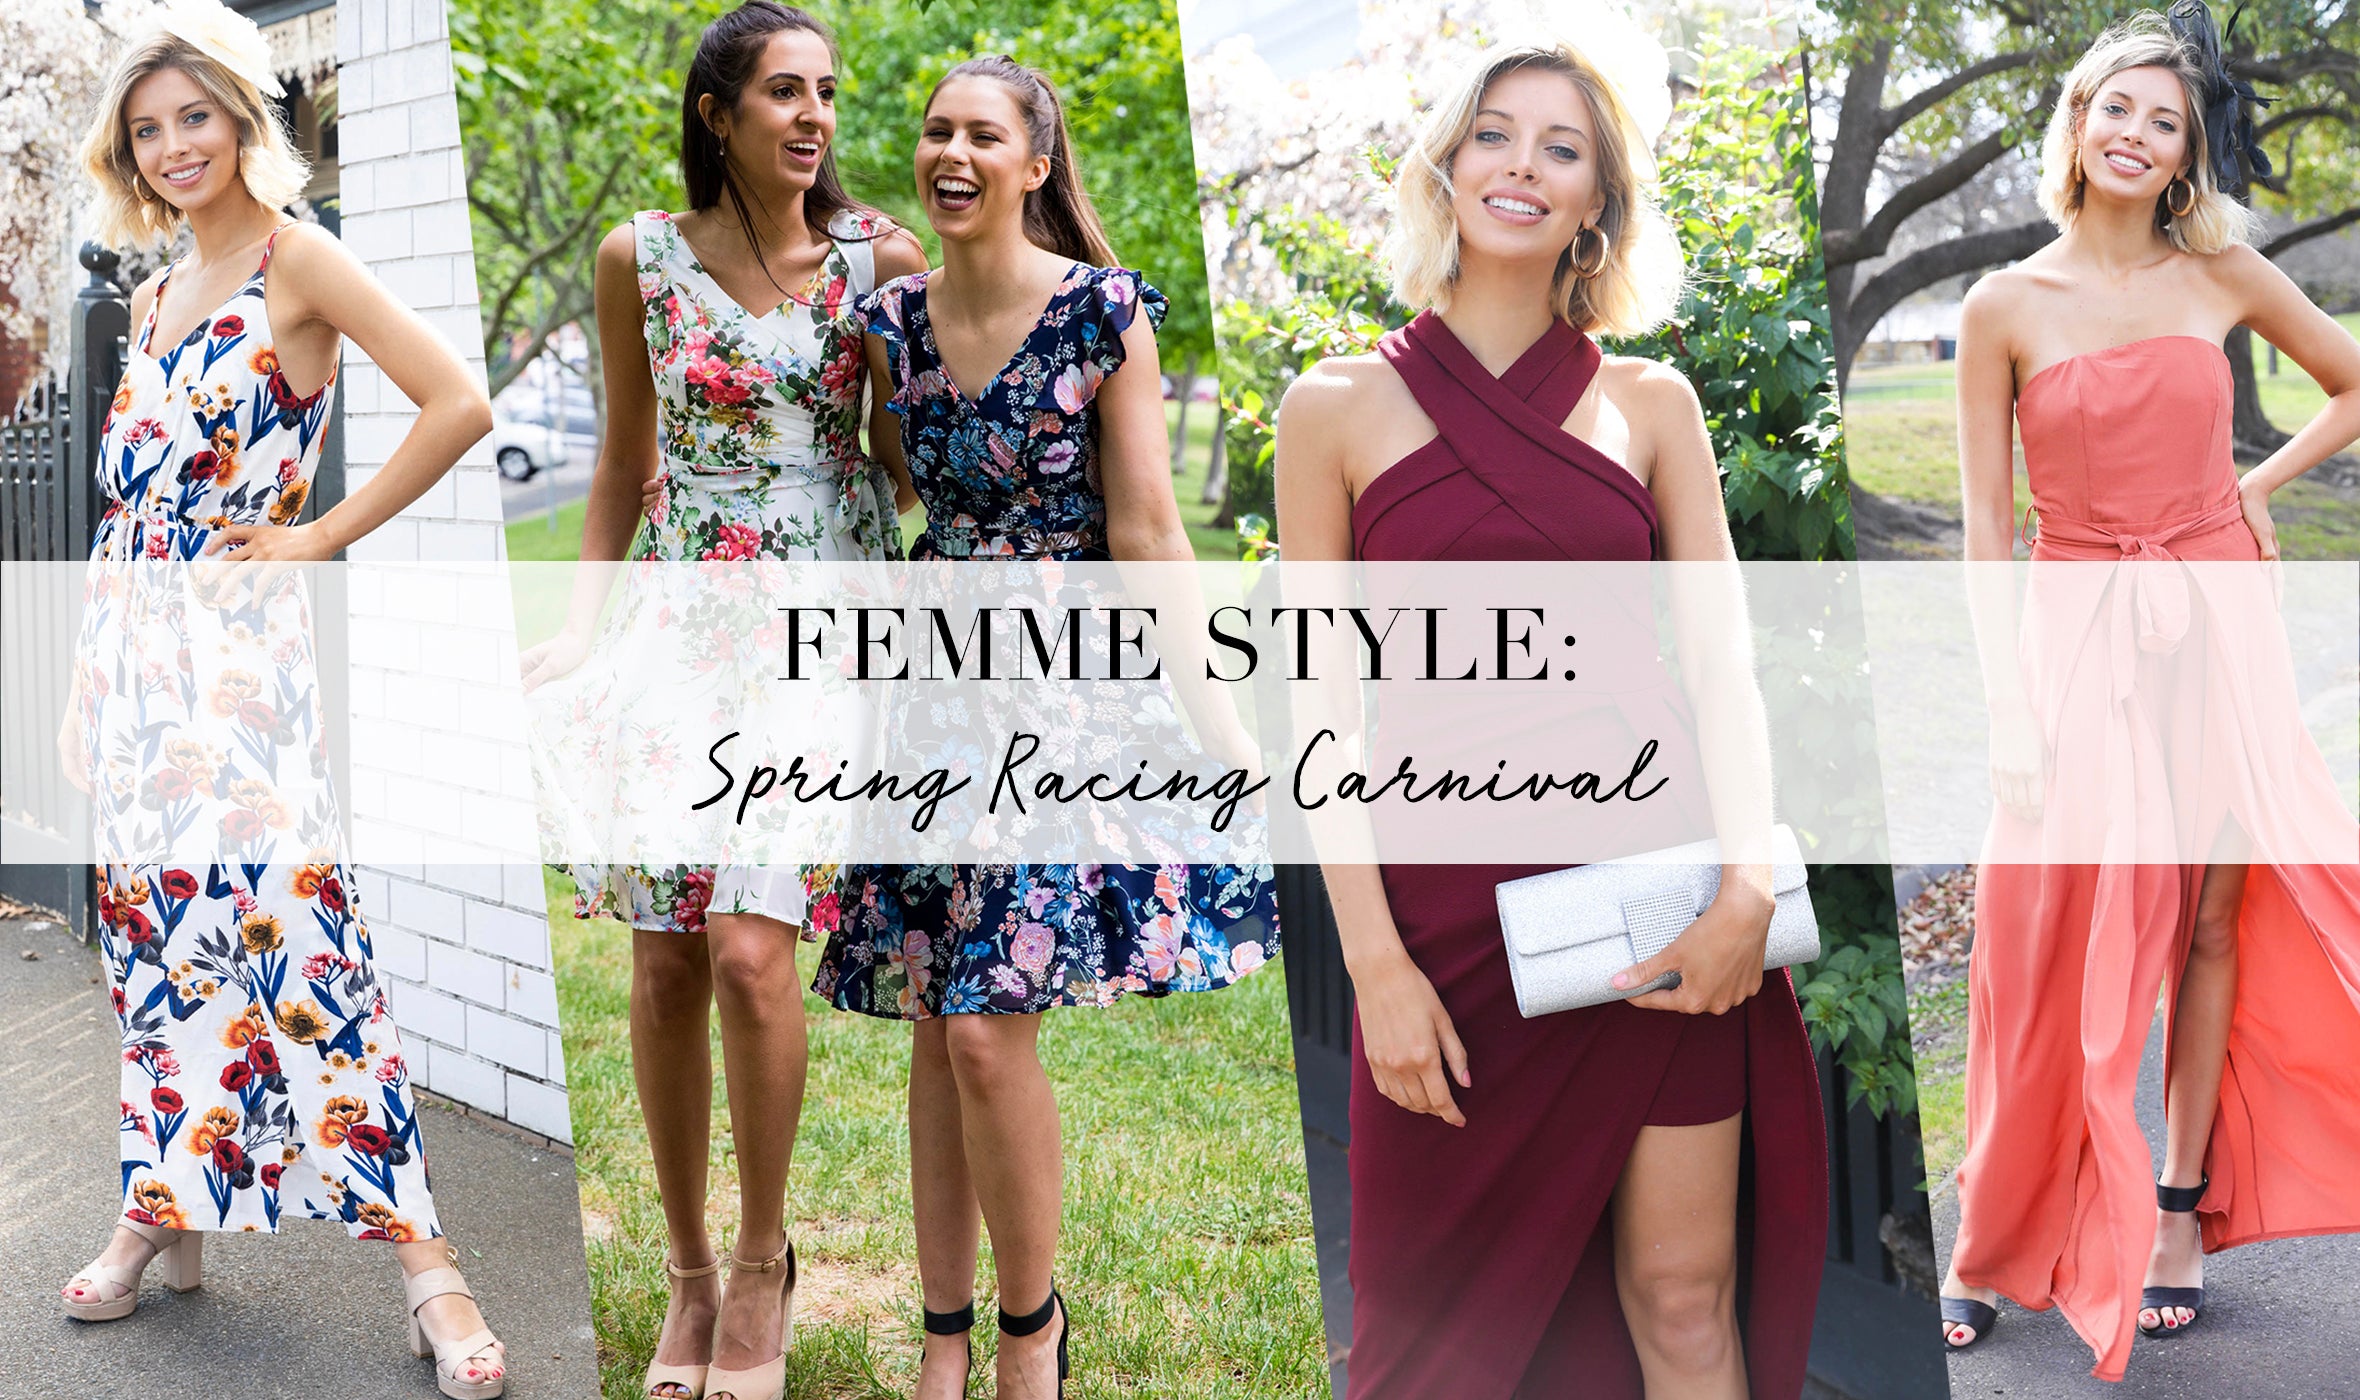 Your Ultimate Guide For Spring Racing Carnival Dressing & FEMME Connection